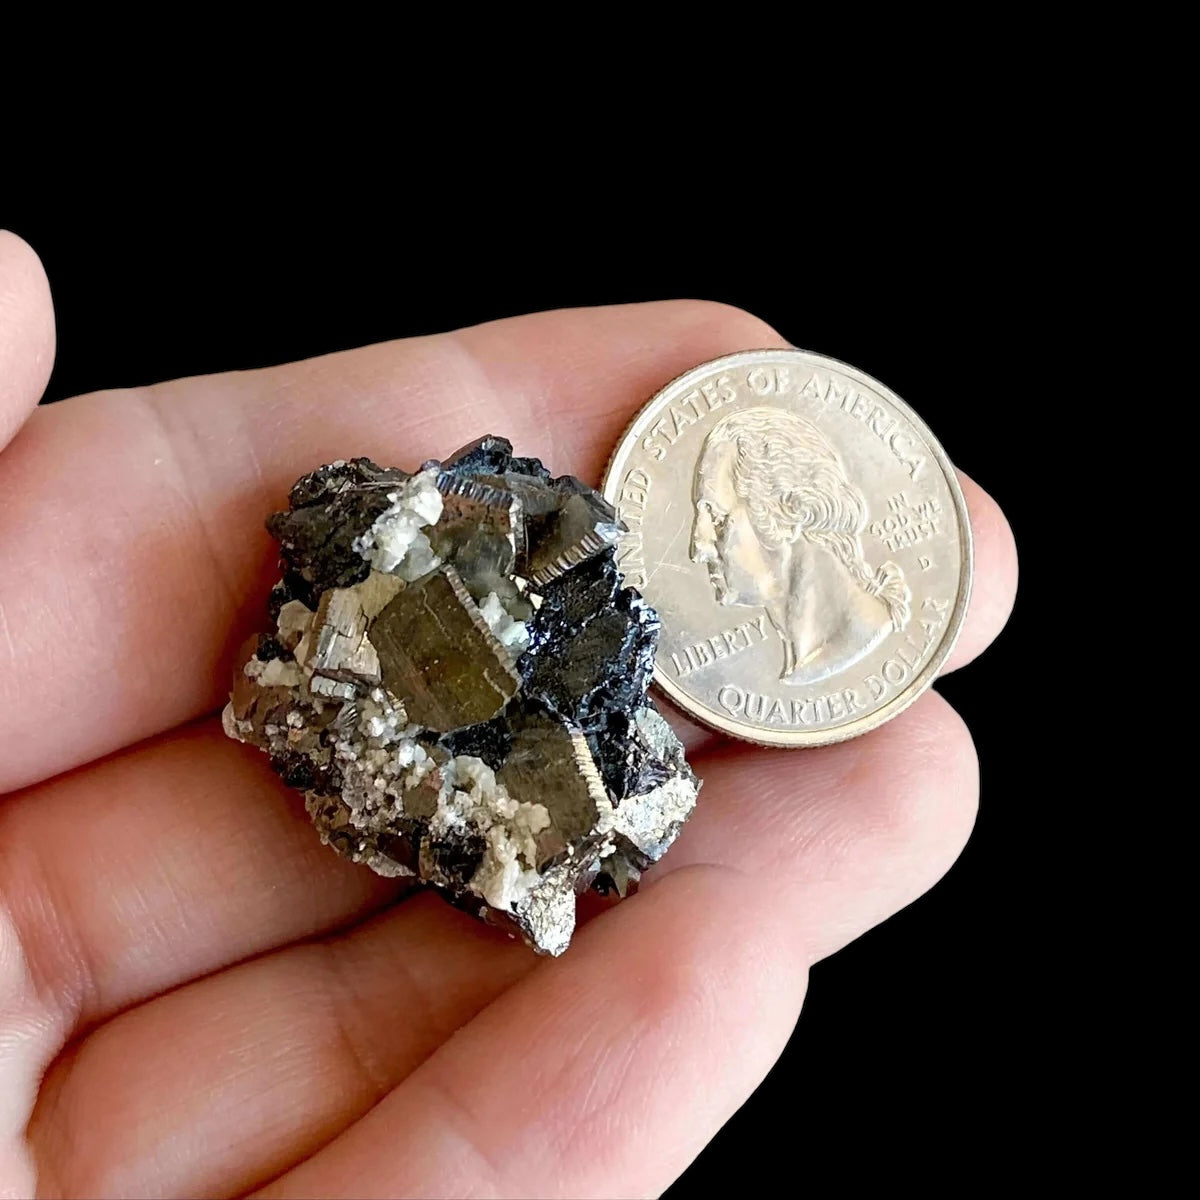 Pyrite and Mixed Mexican Minerals | Stock C